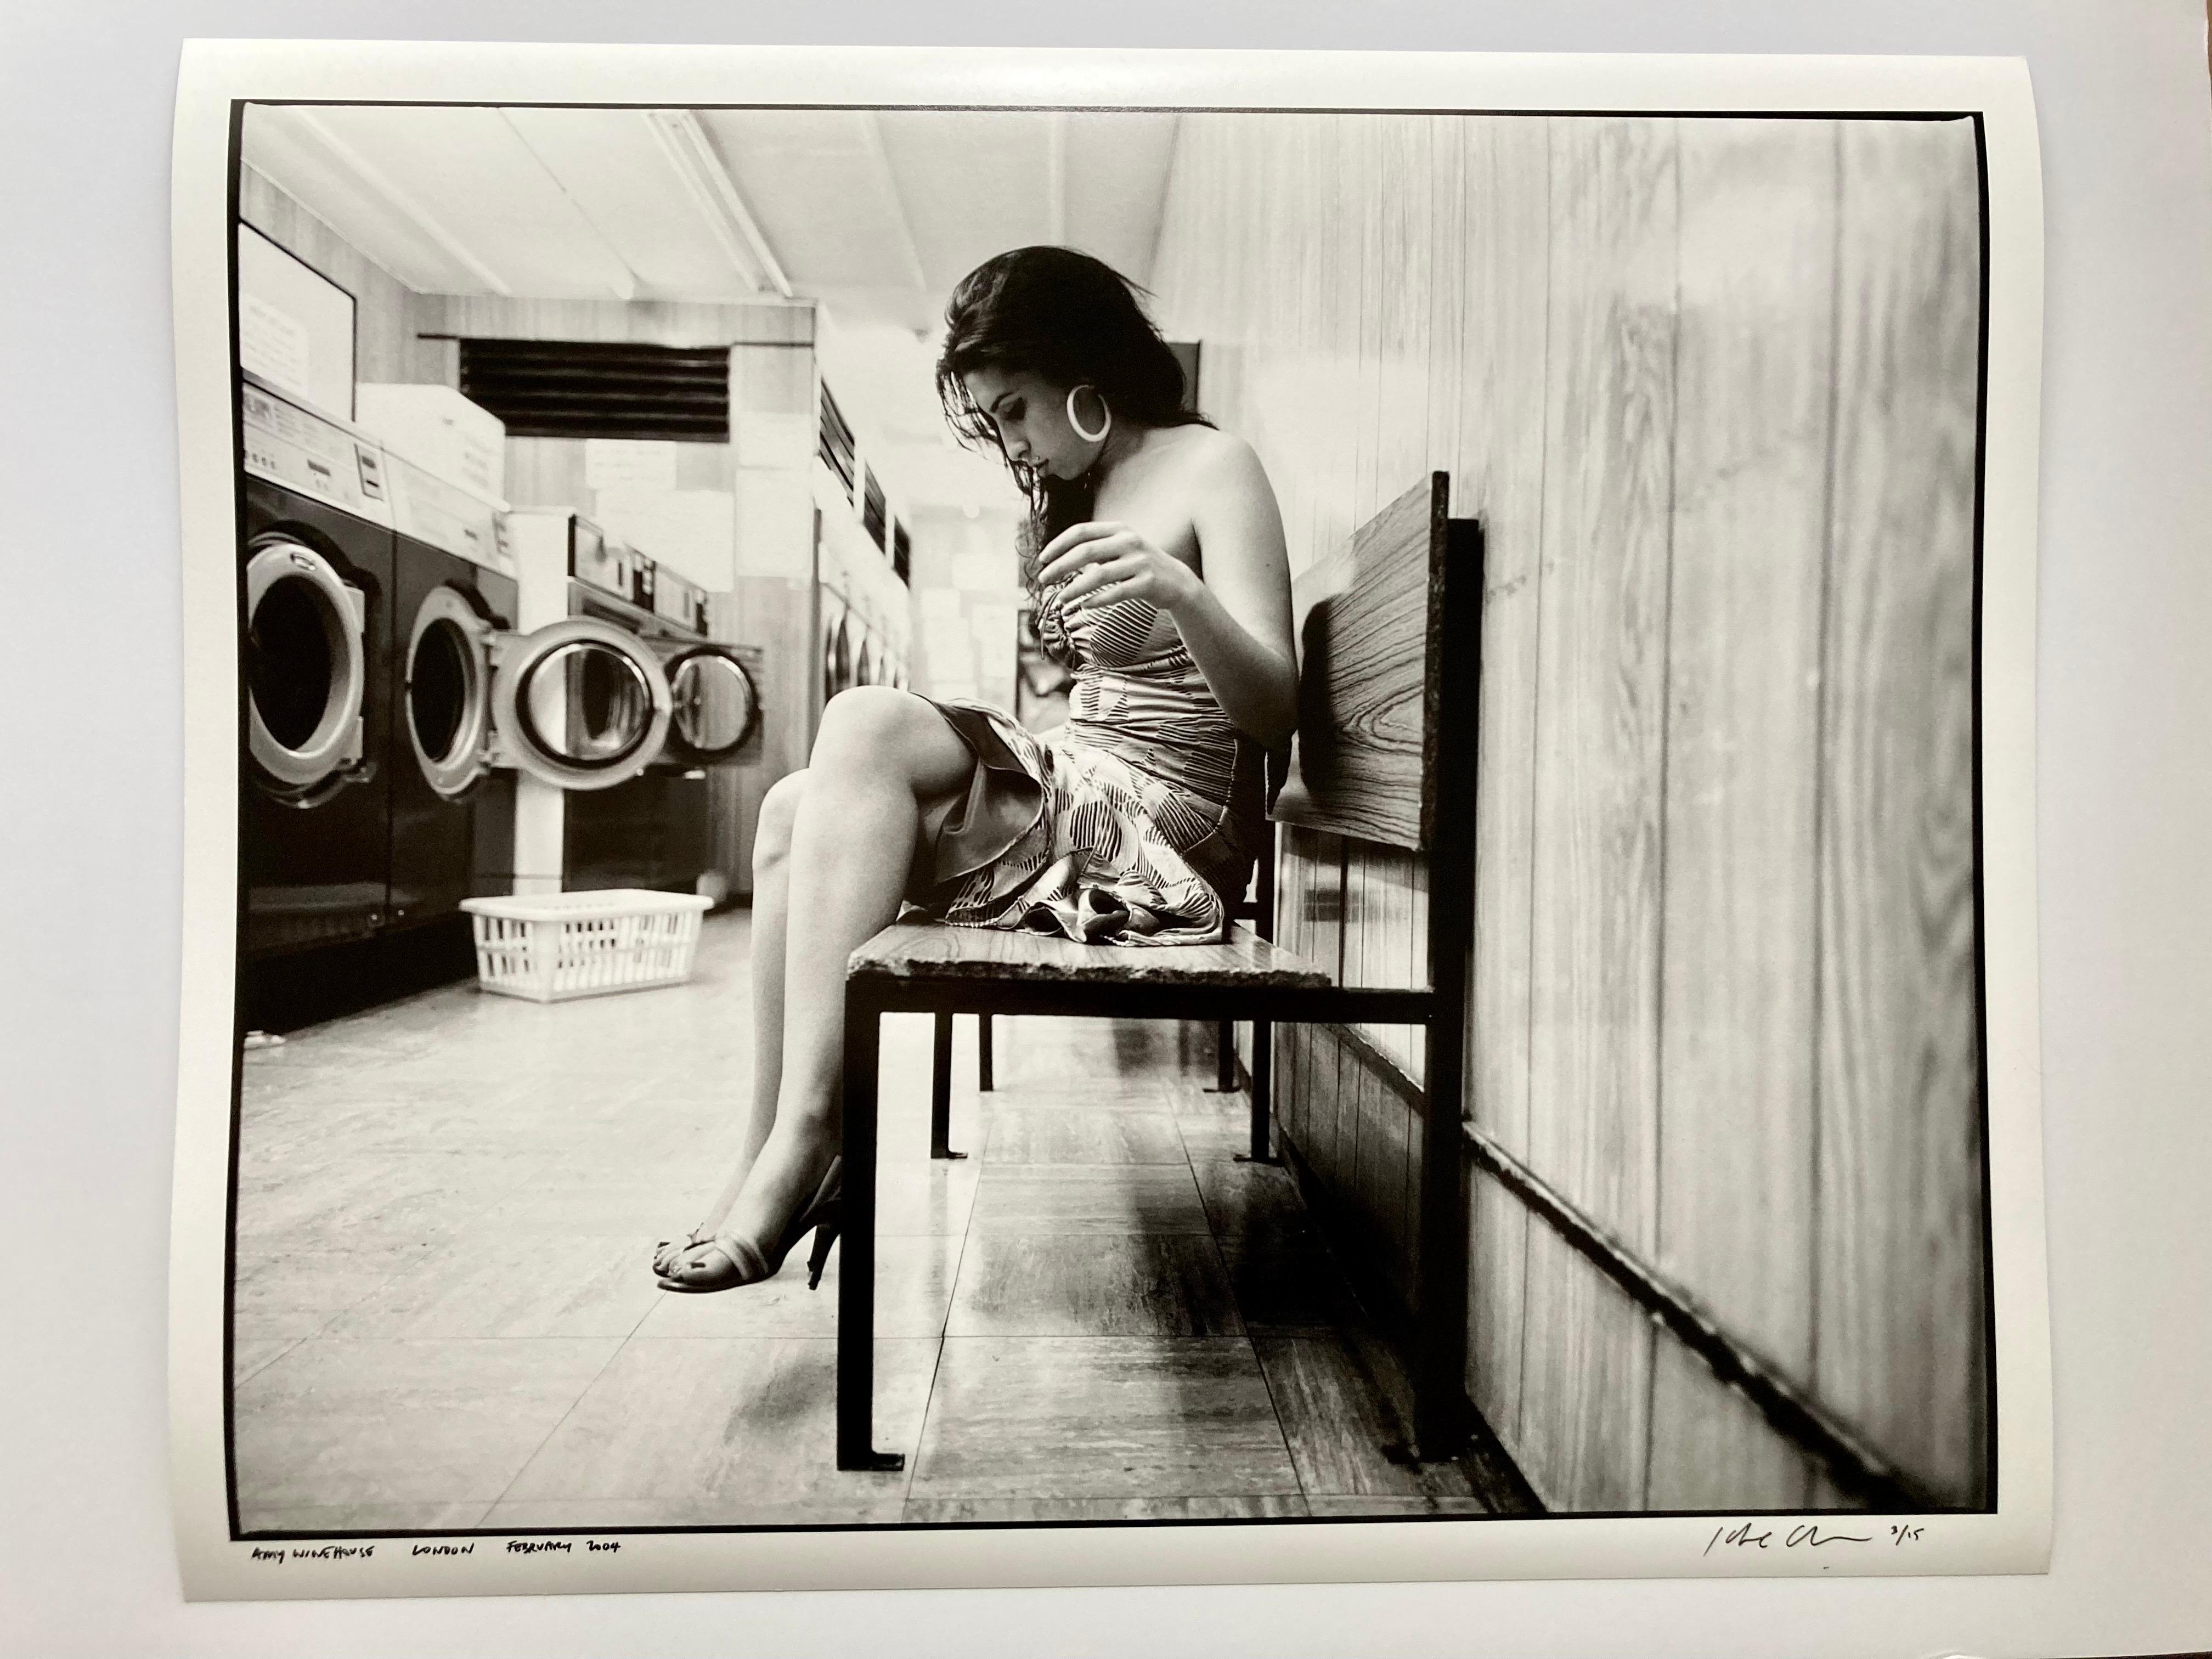 Amy Winehouse at the laundromat 20x24